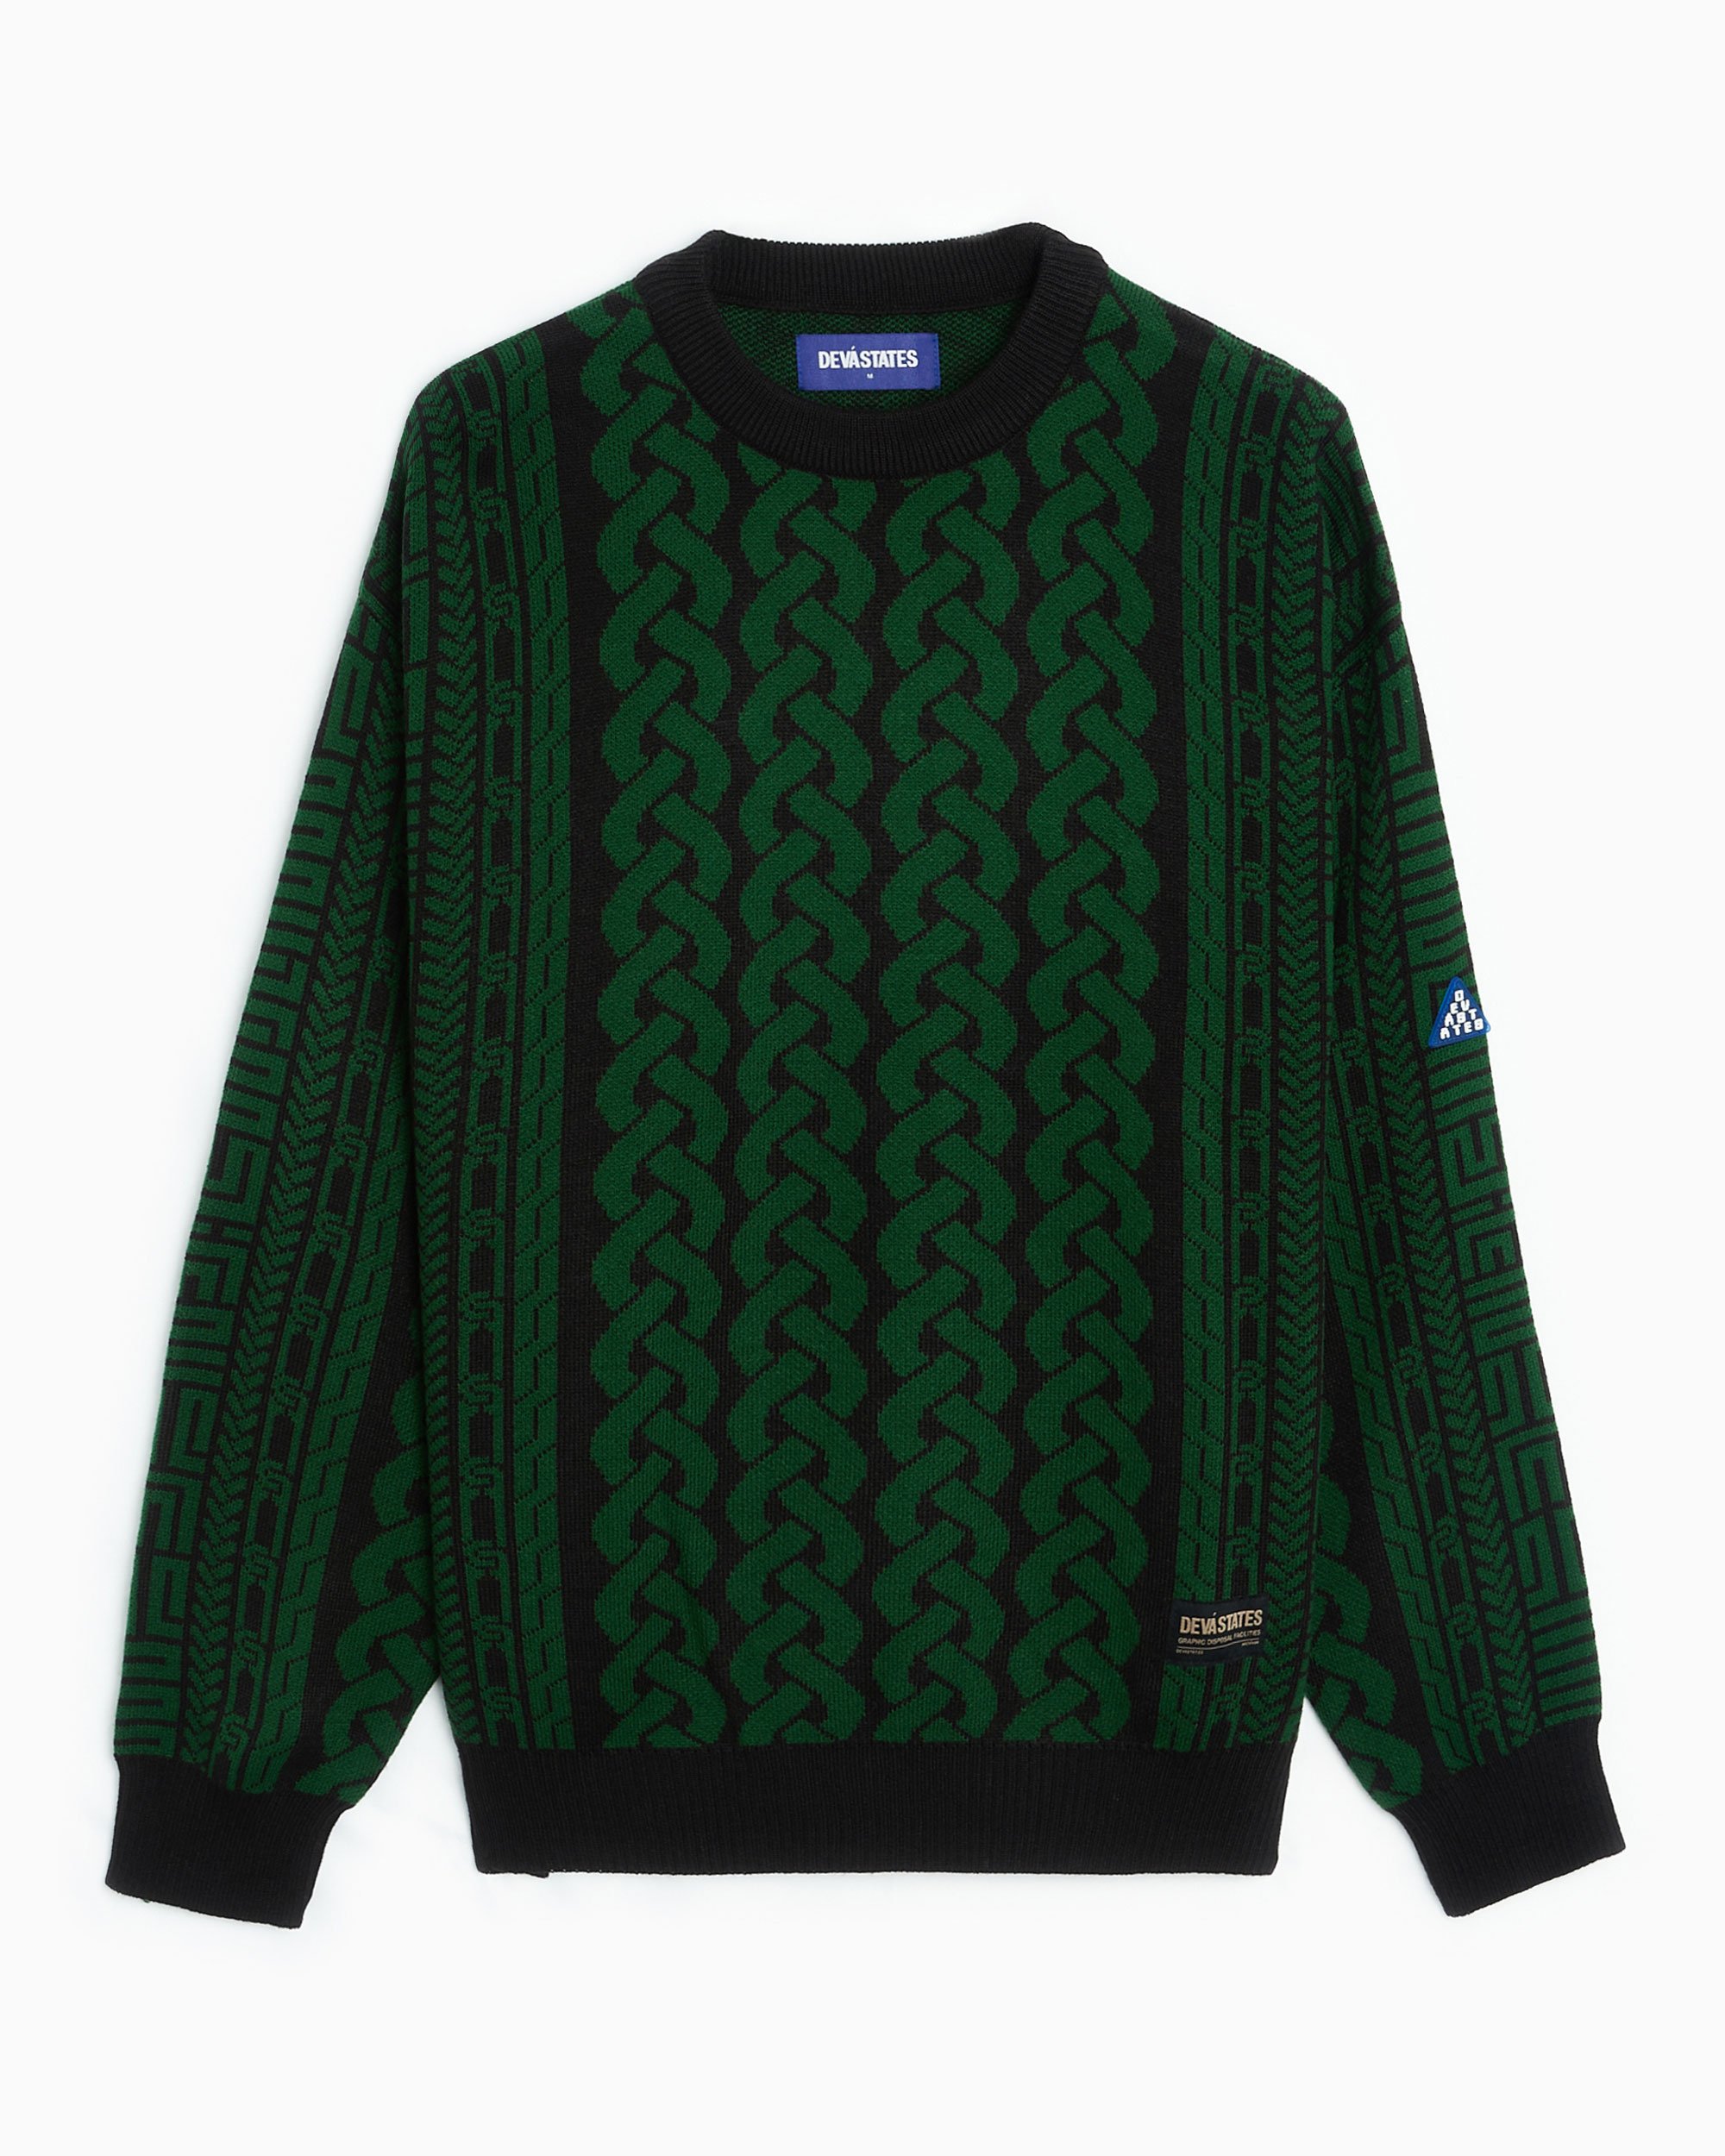 2000s Archive jacquard knit sweater